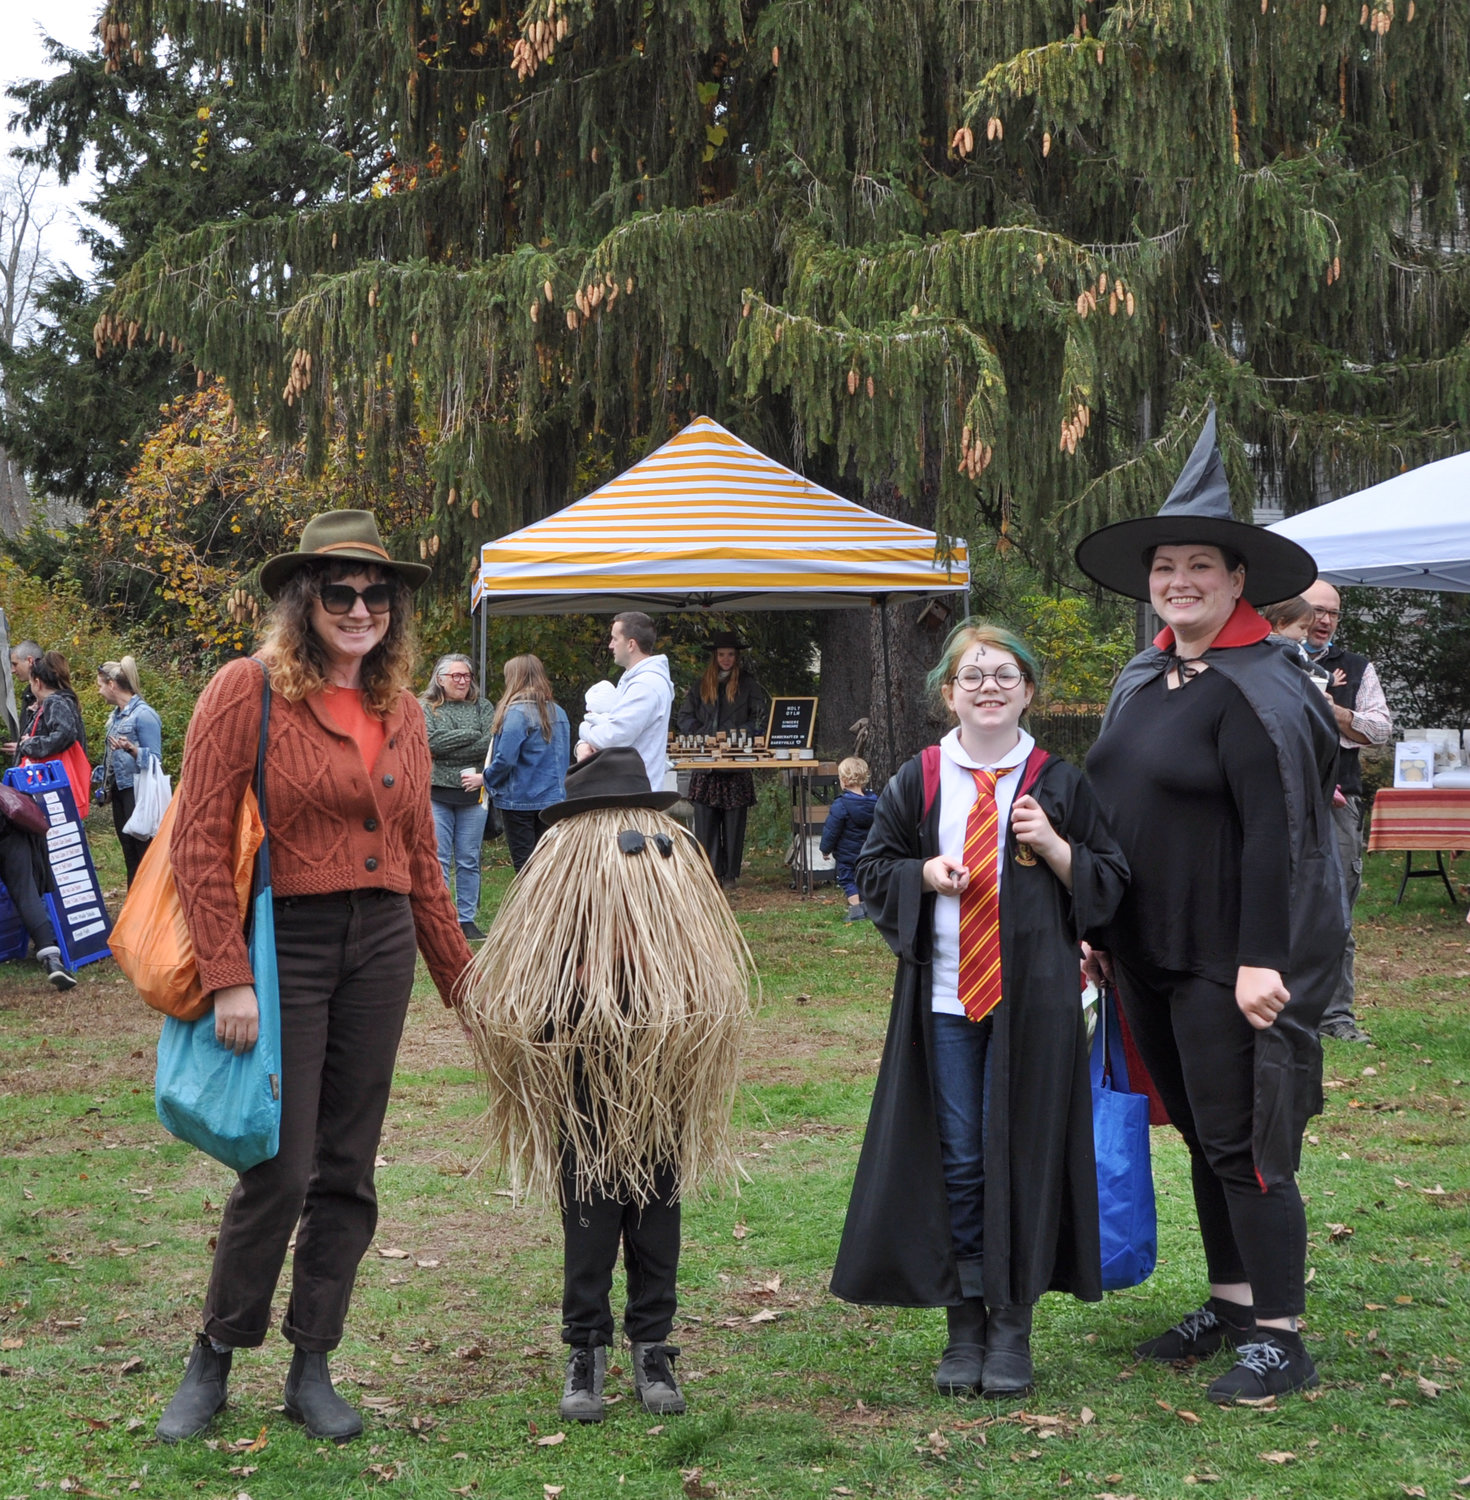 At last week's Barryville Farmers' Market the costume parades for both children and canines were great fun to photograph.  To see all of the photos, check out our Facebook page and dot com. And yes, "Cousin Itt" won a prize!